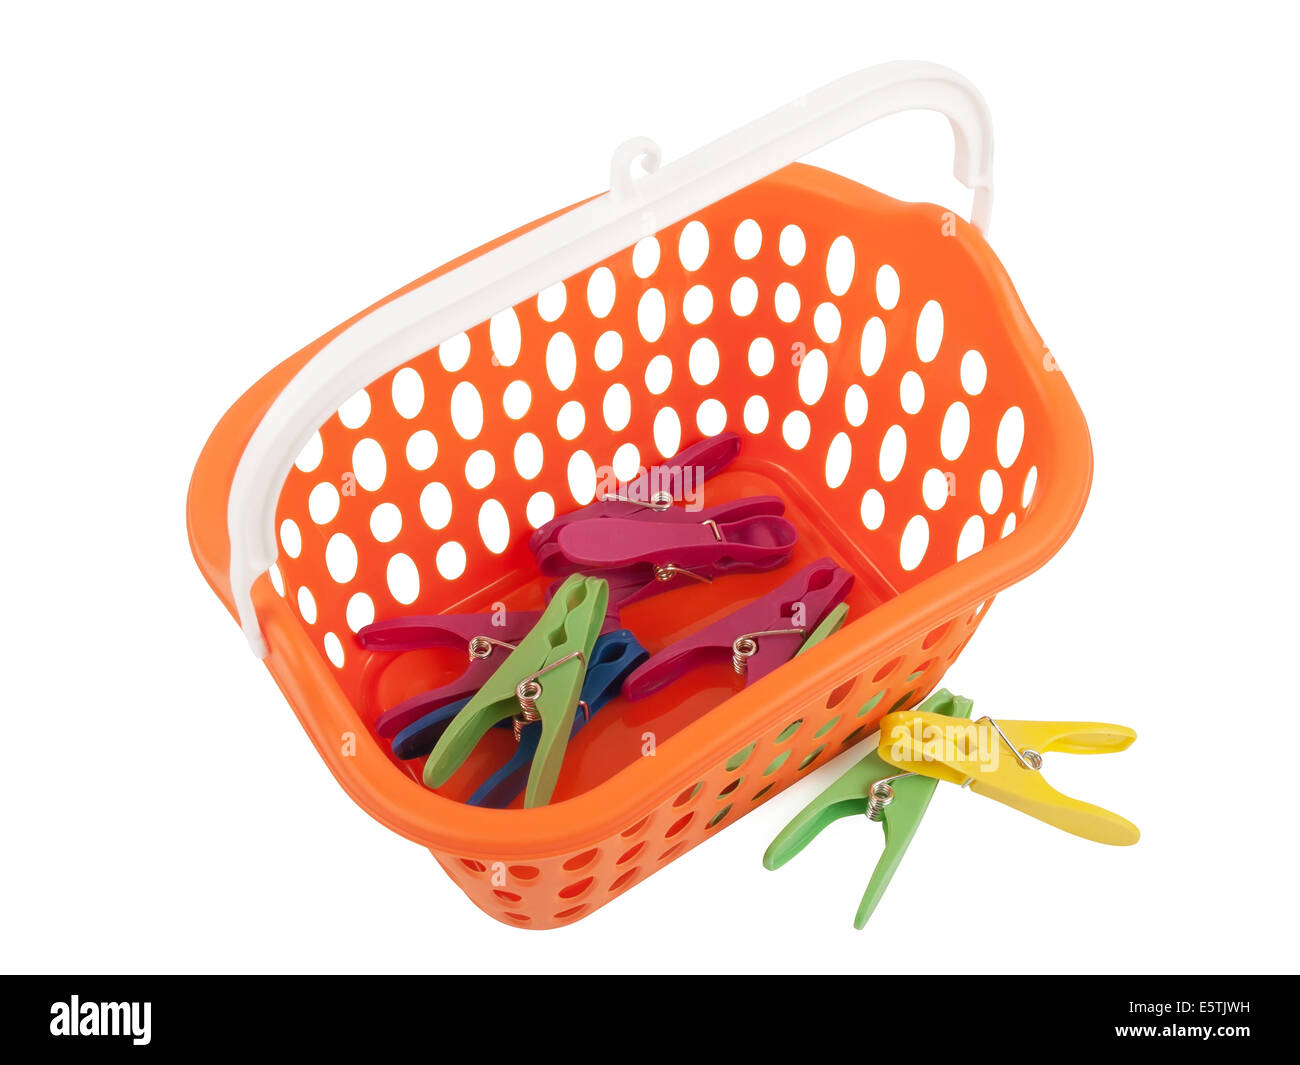 Colorful clothes pegs and orange plastic basket Stock Photo